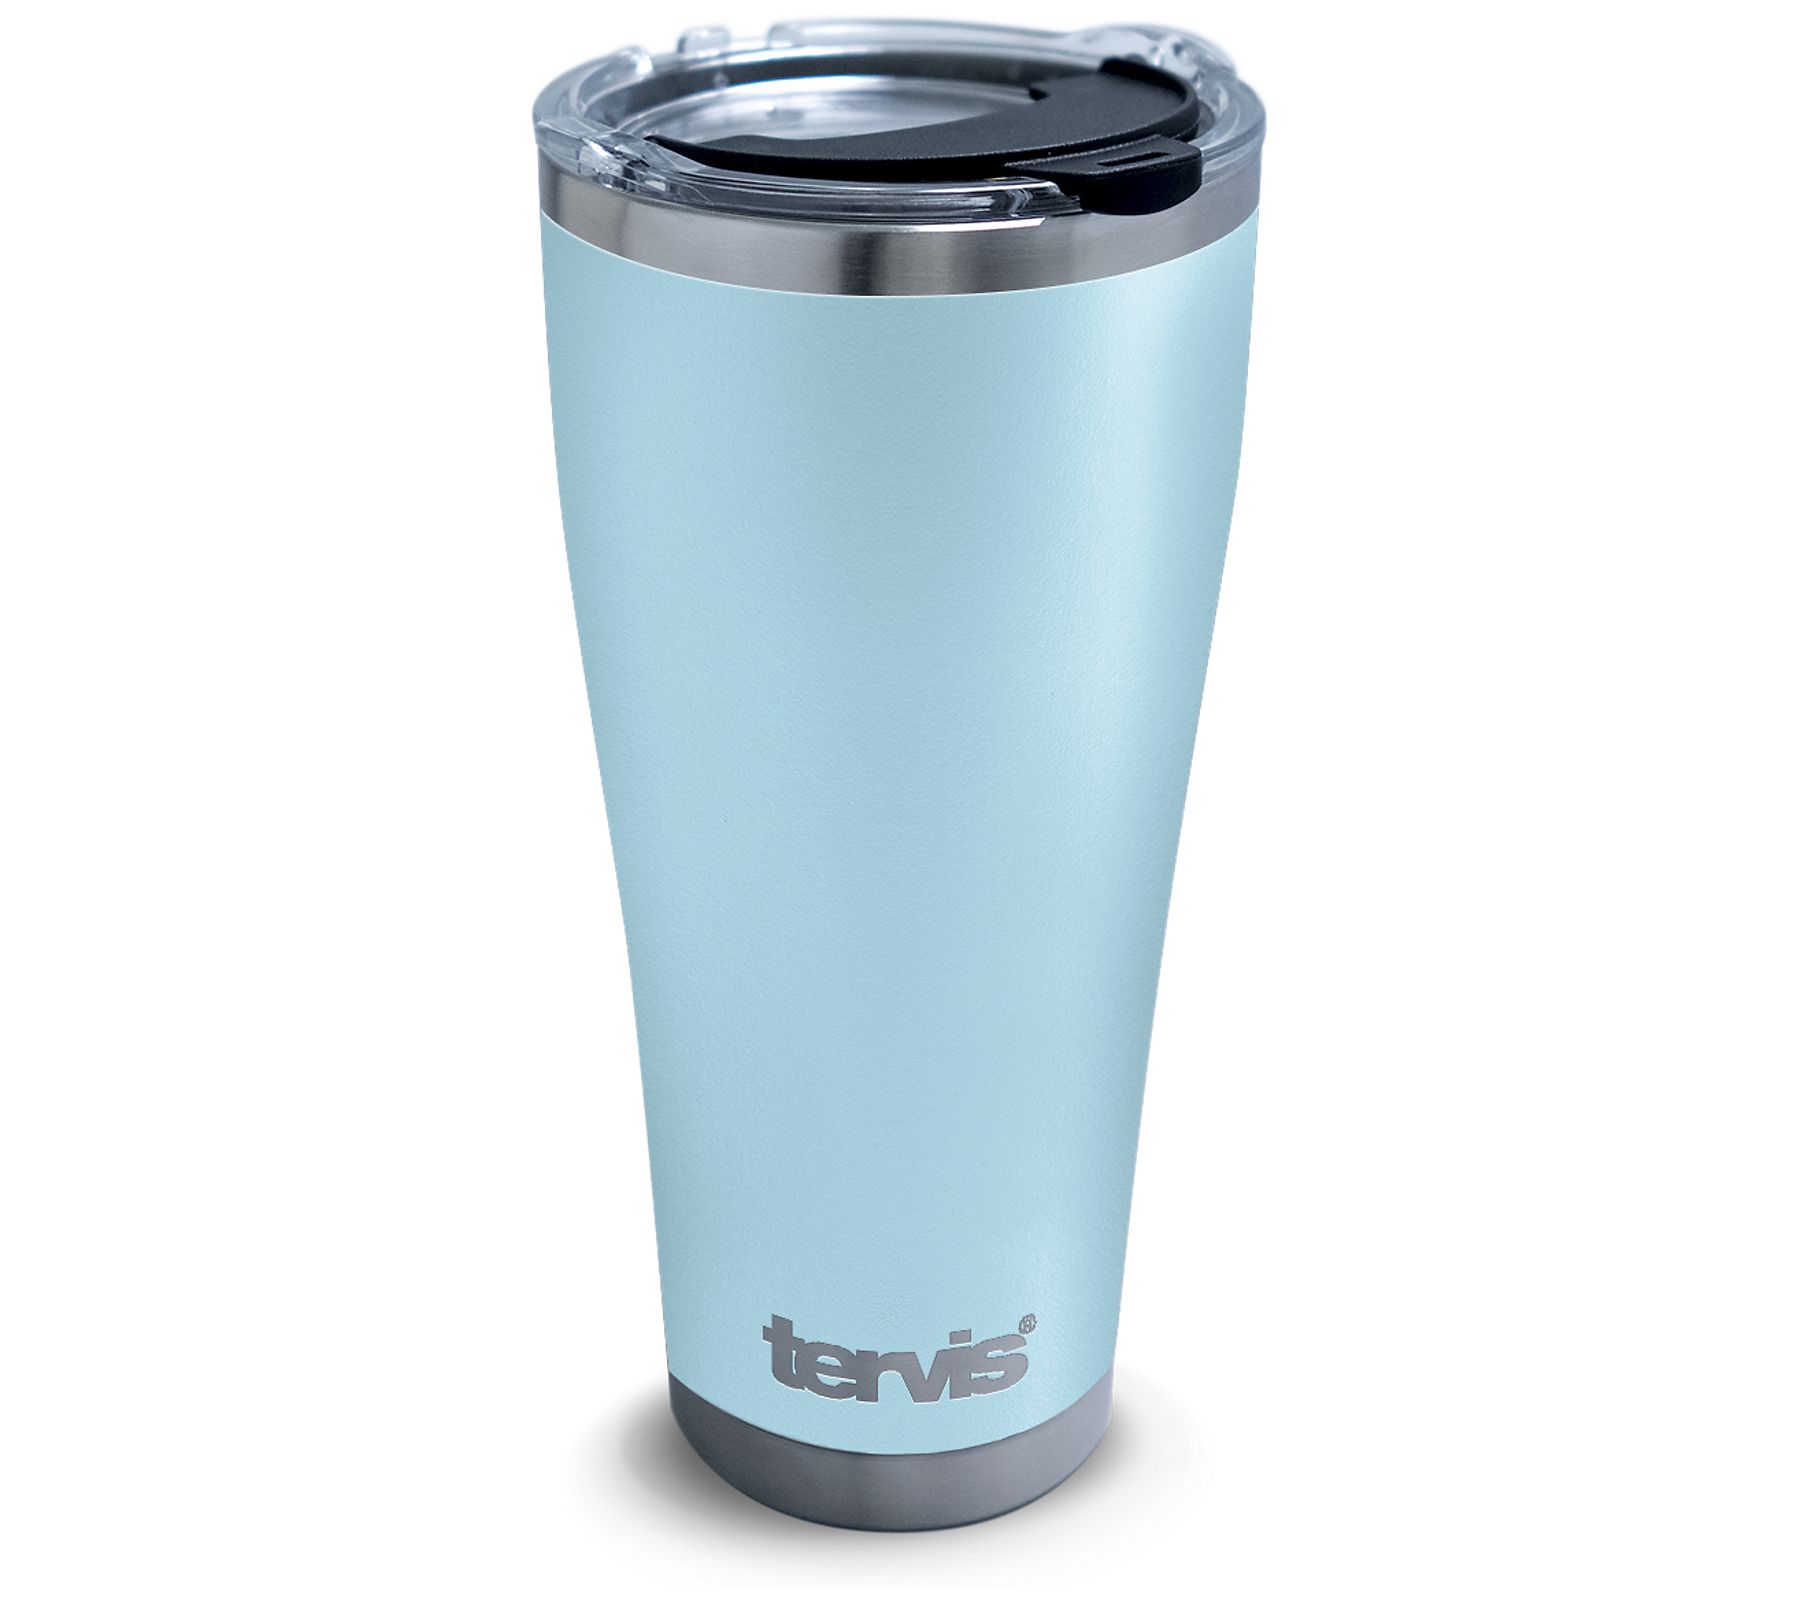 Tervis 30 oz Stainless Steel Tumbler - QVC.com Tervis Stainless Steel Wine Tumbler